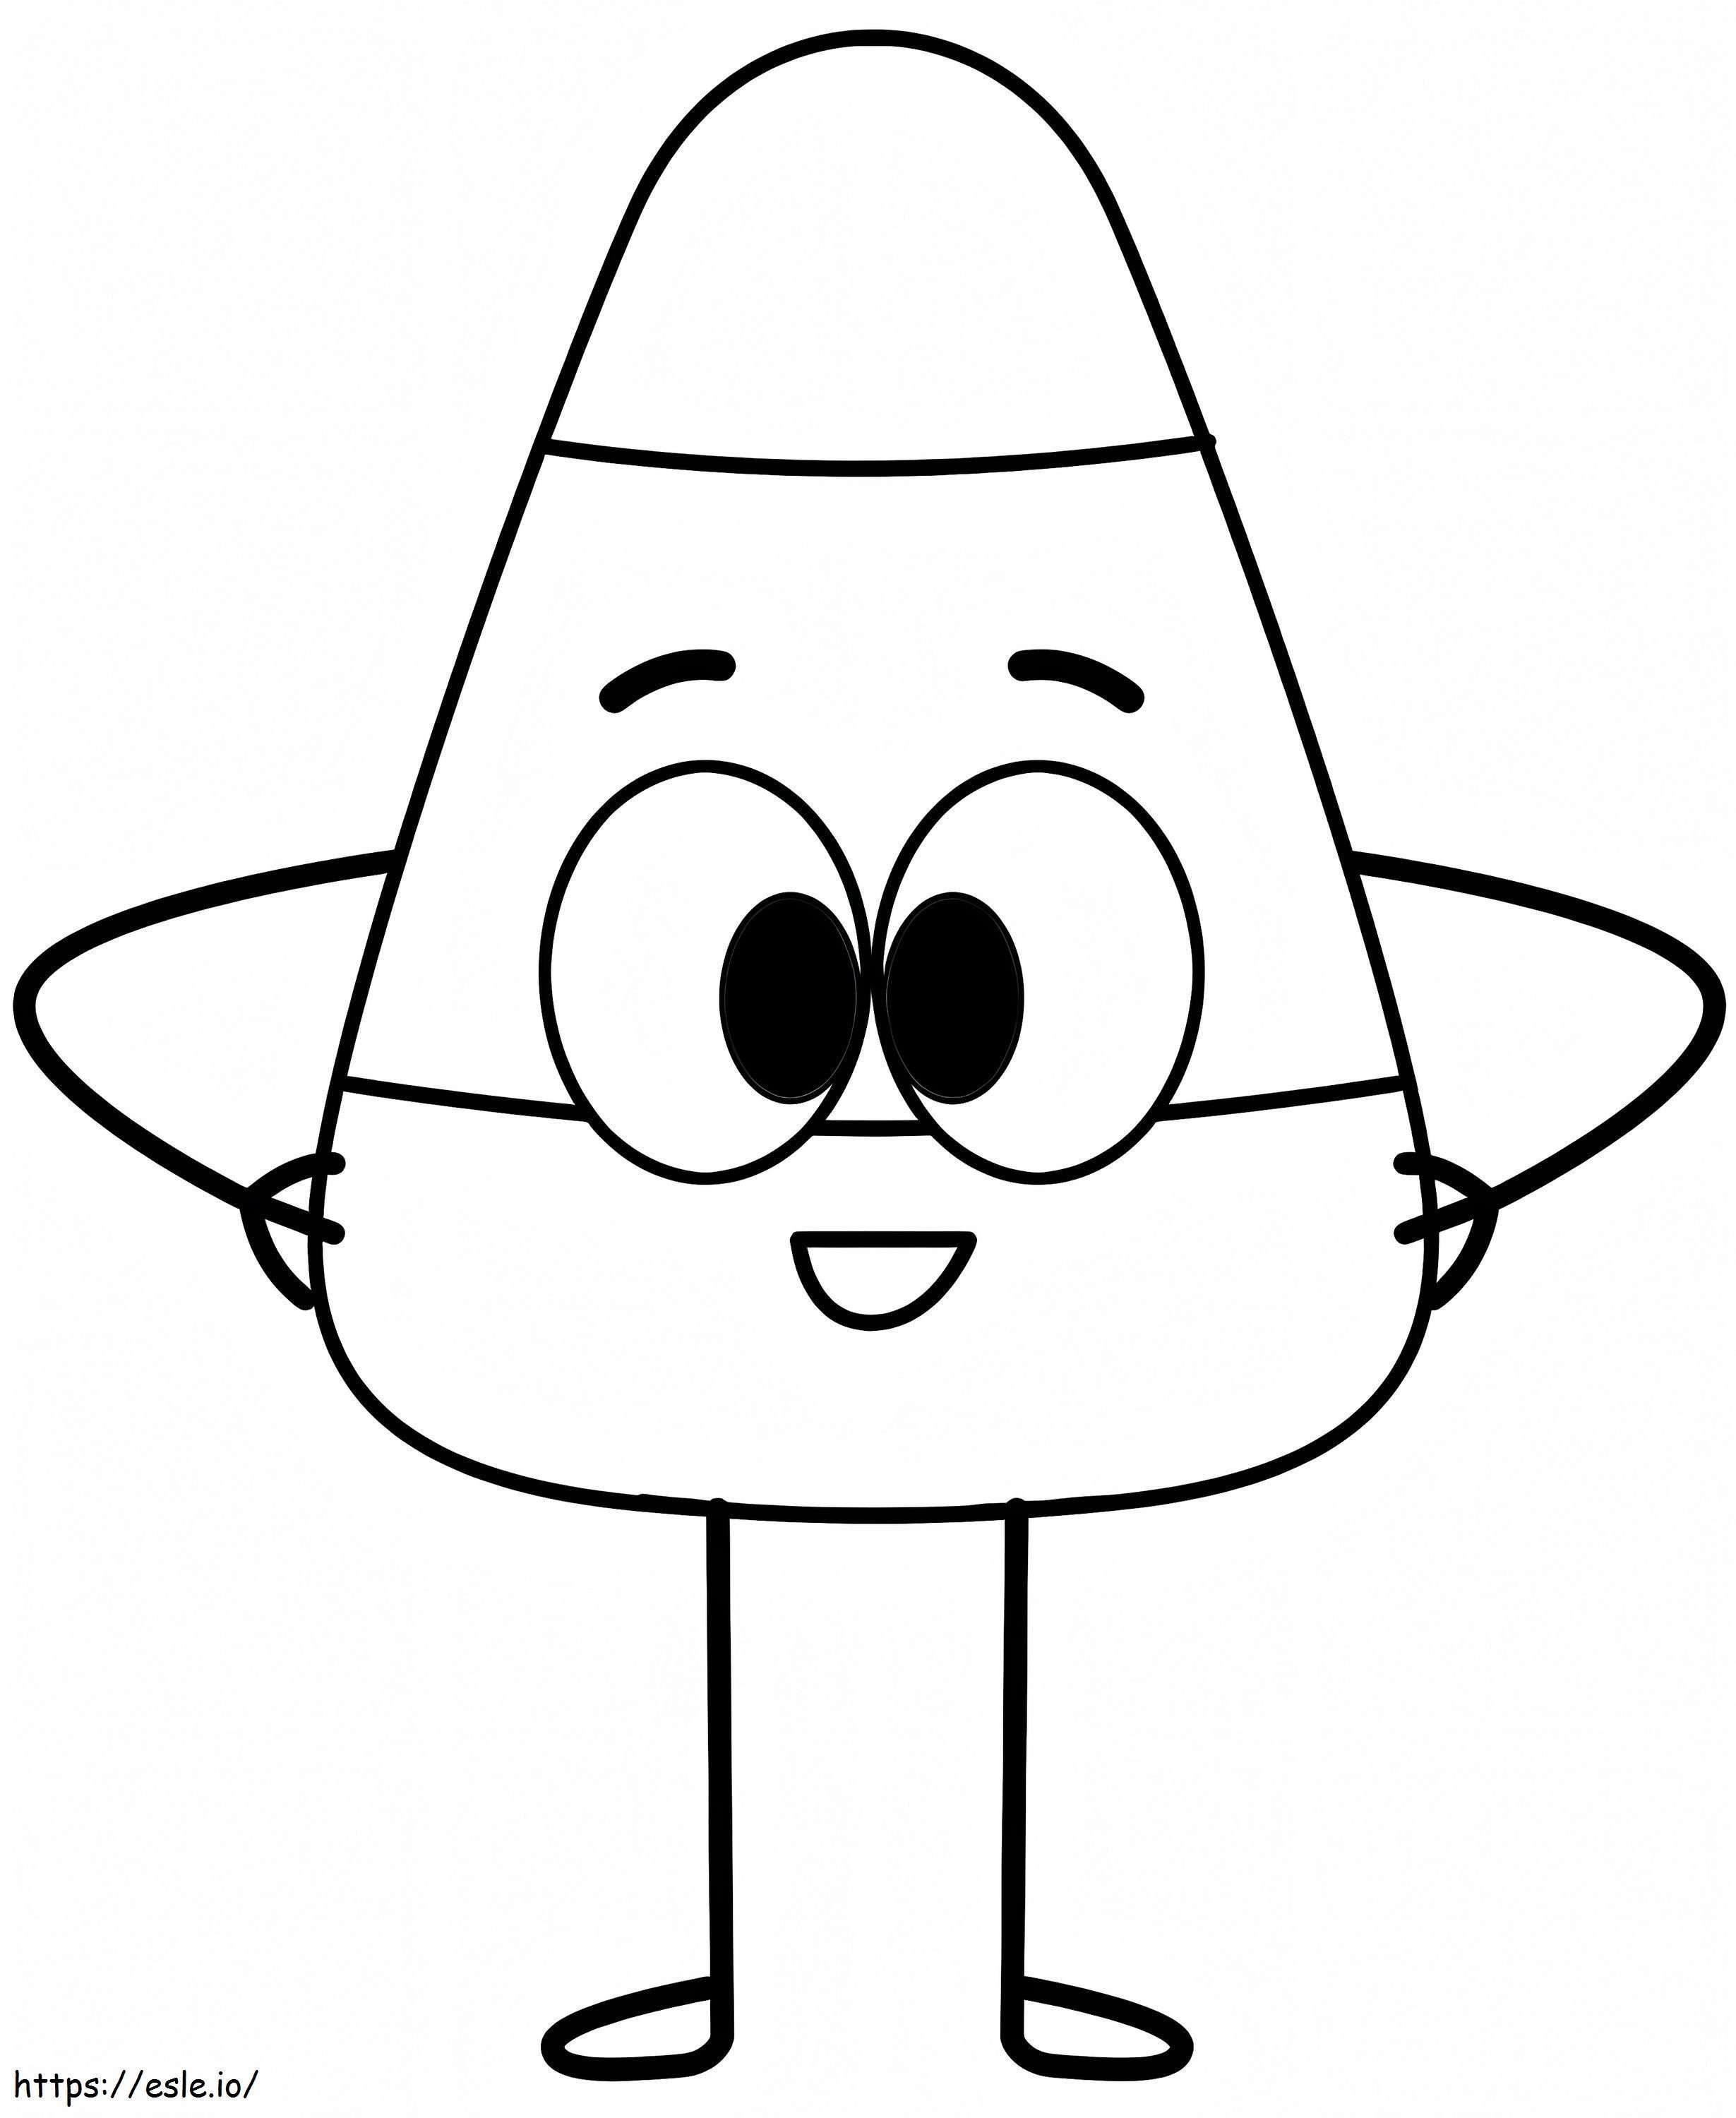 Candy Corn Cartoon coloring page